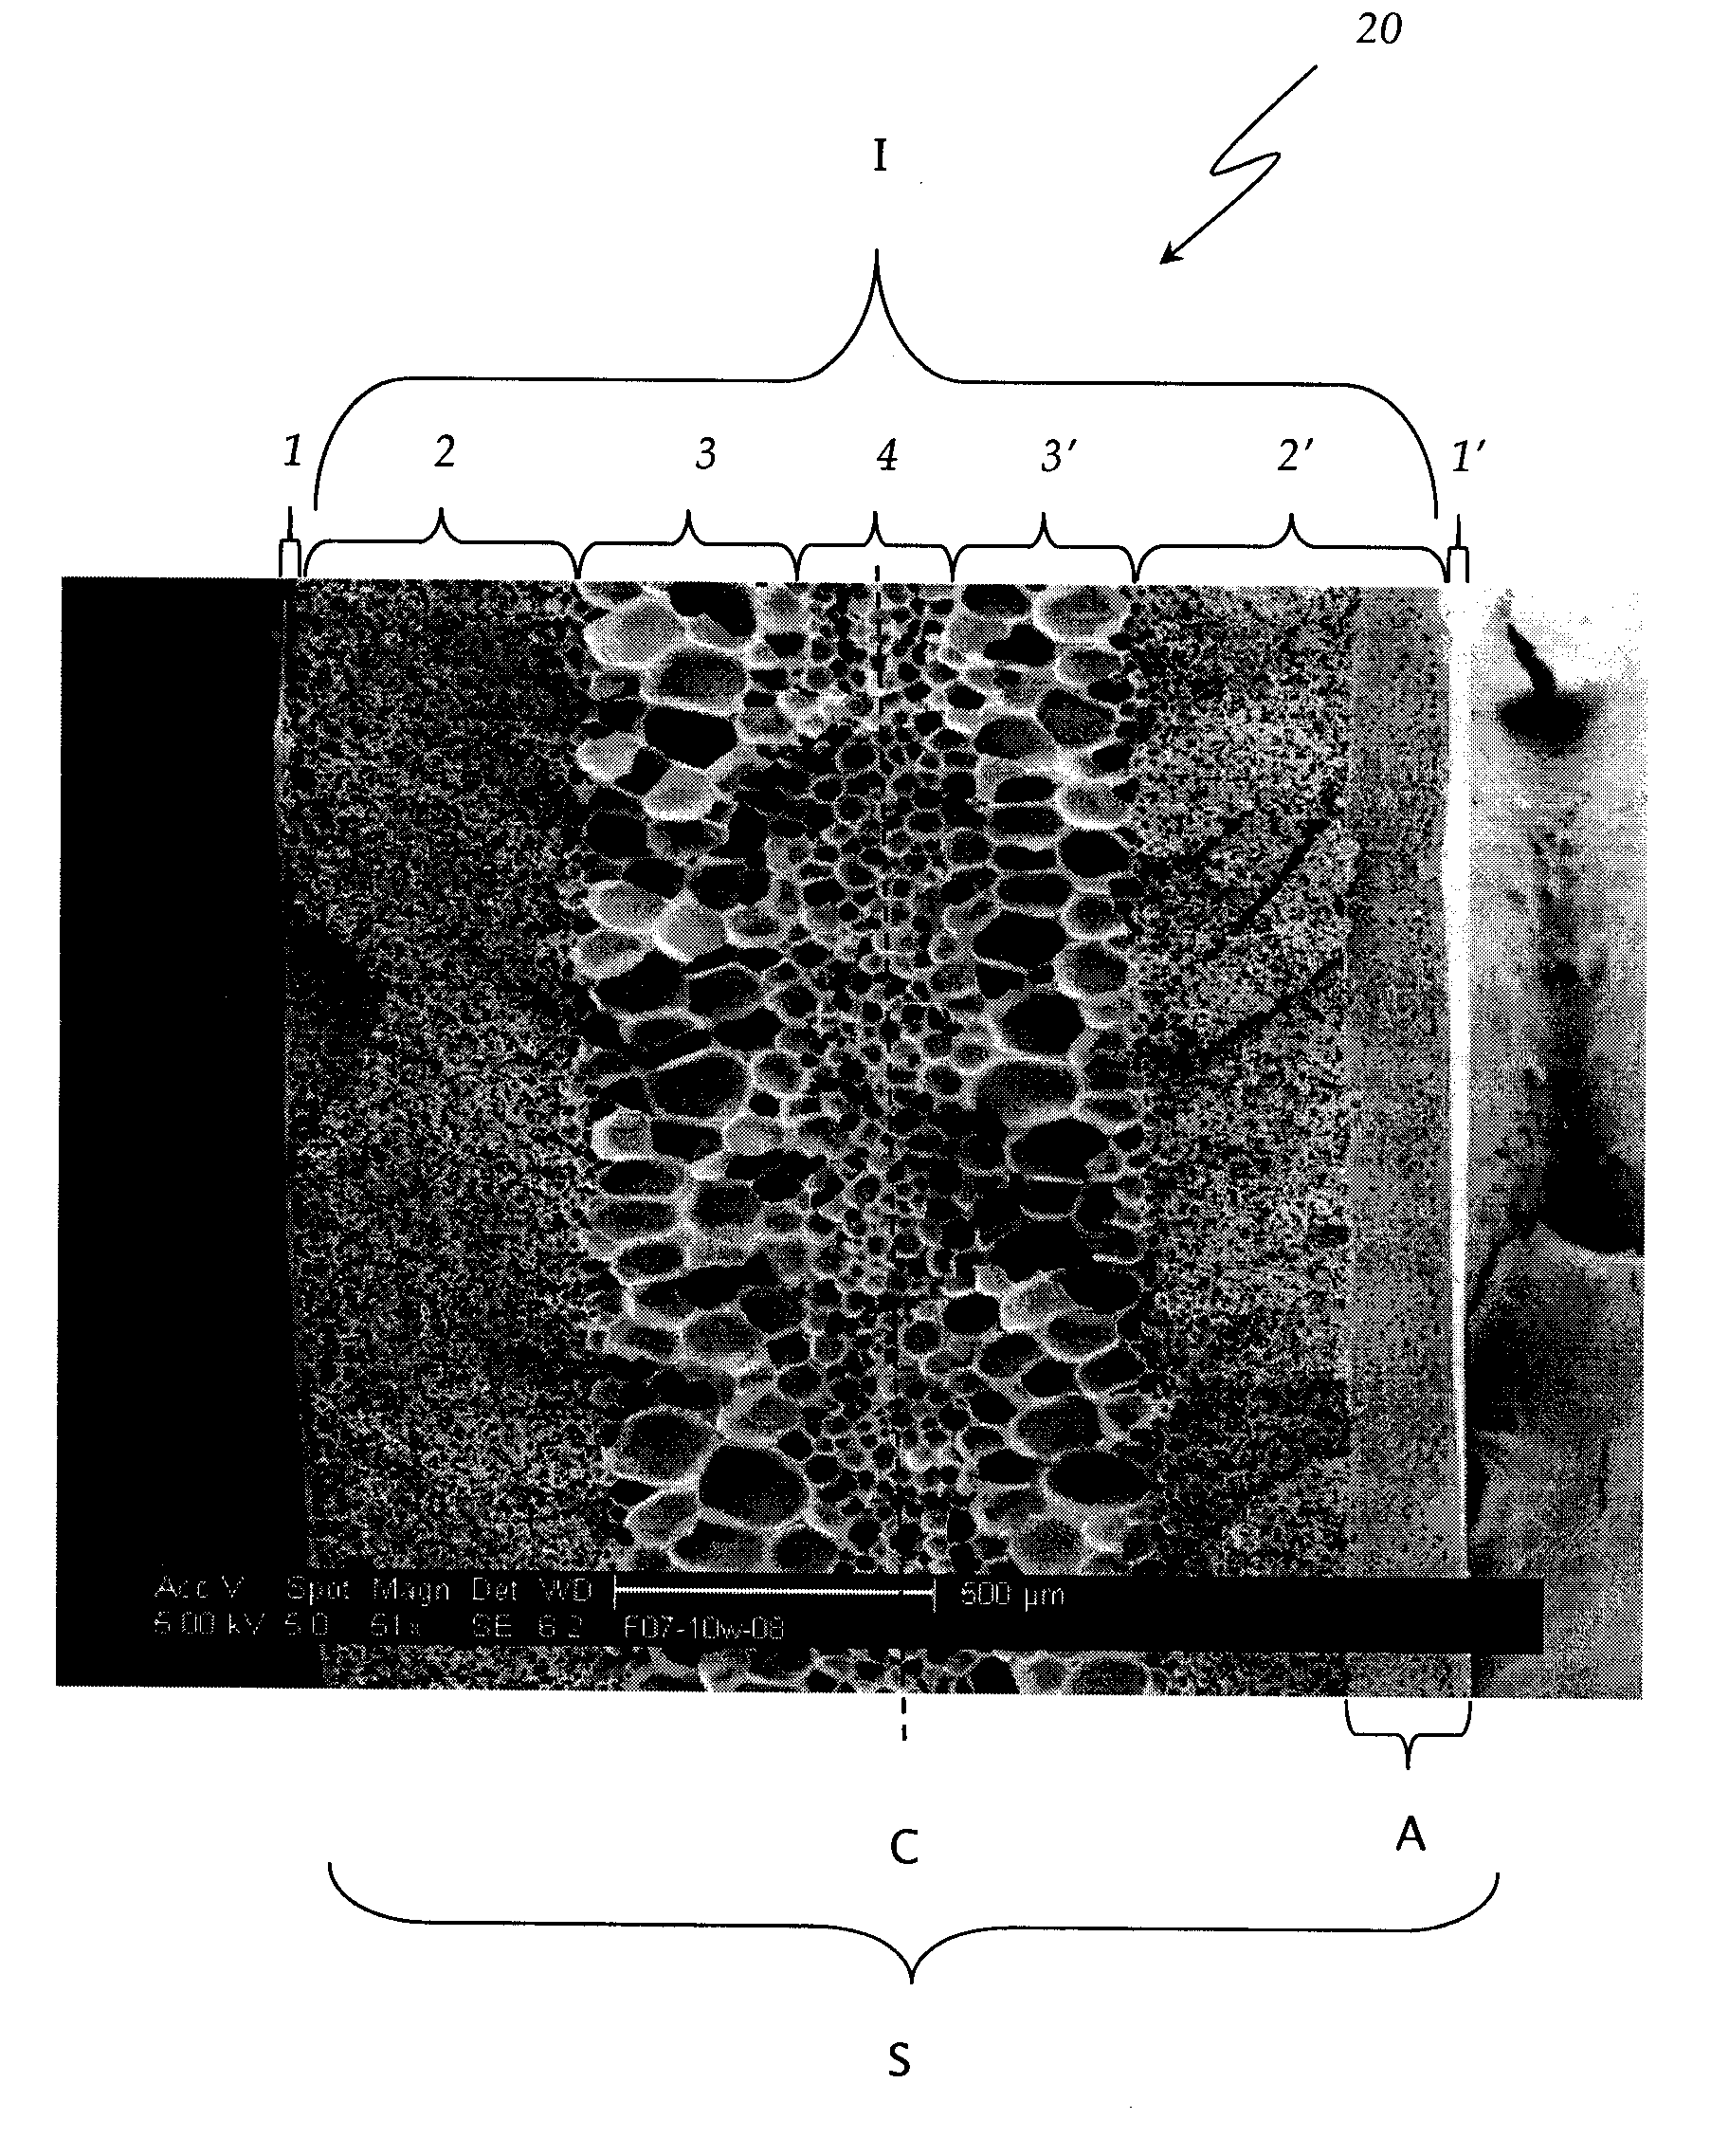 Multi-layered foamed polymeric objects and related methods